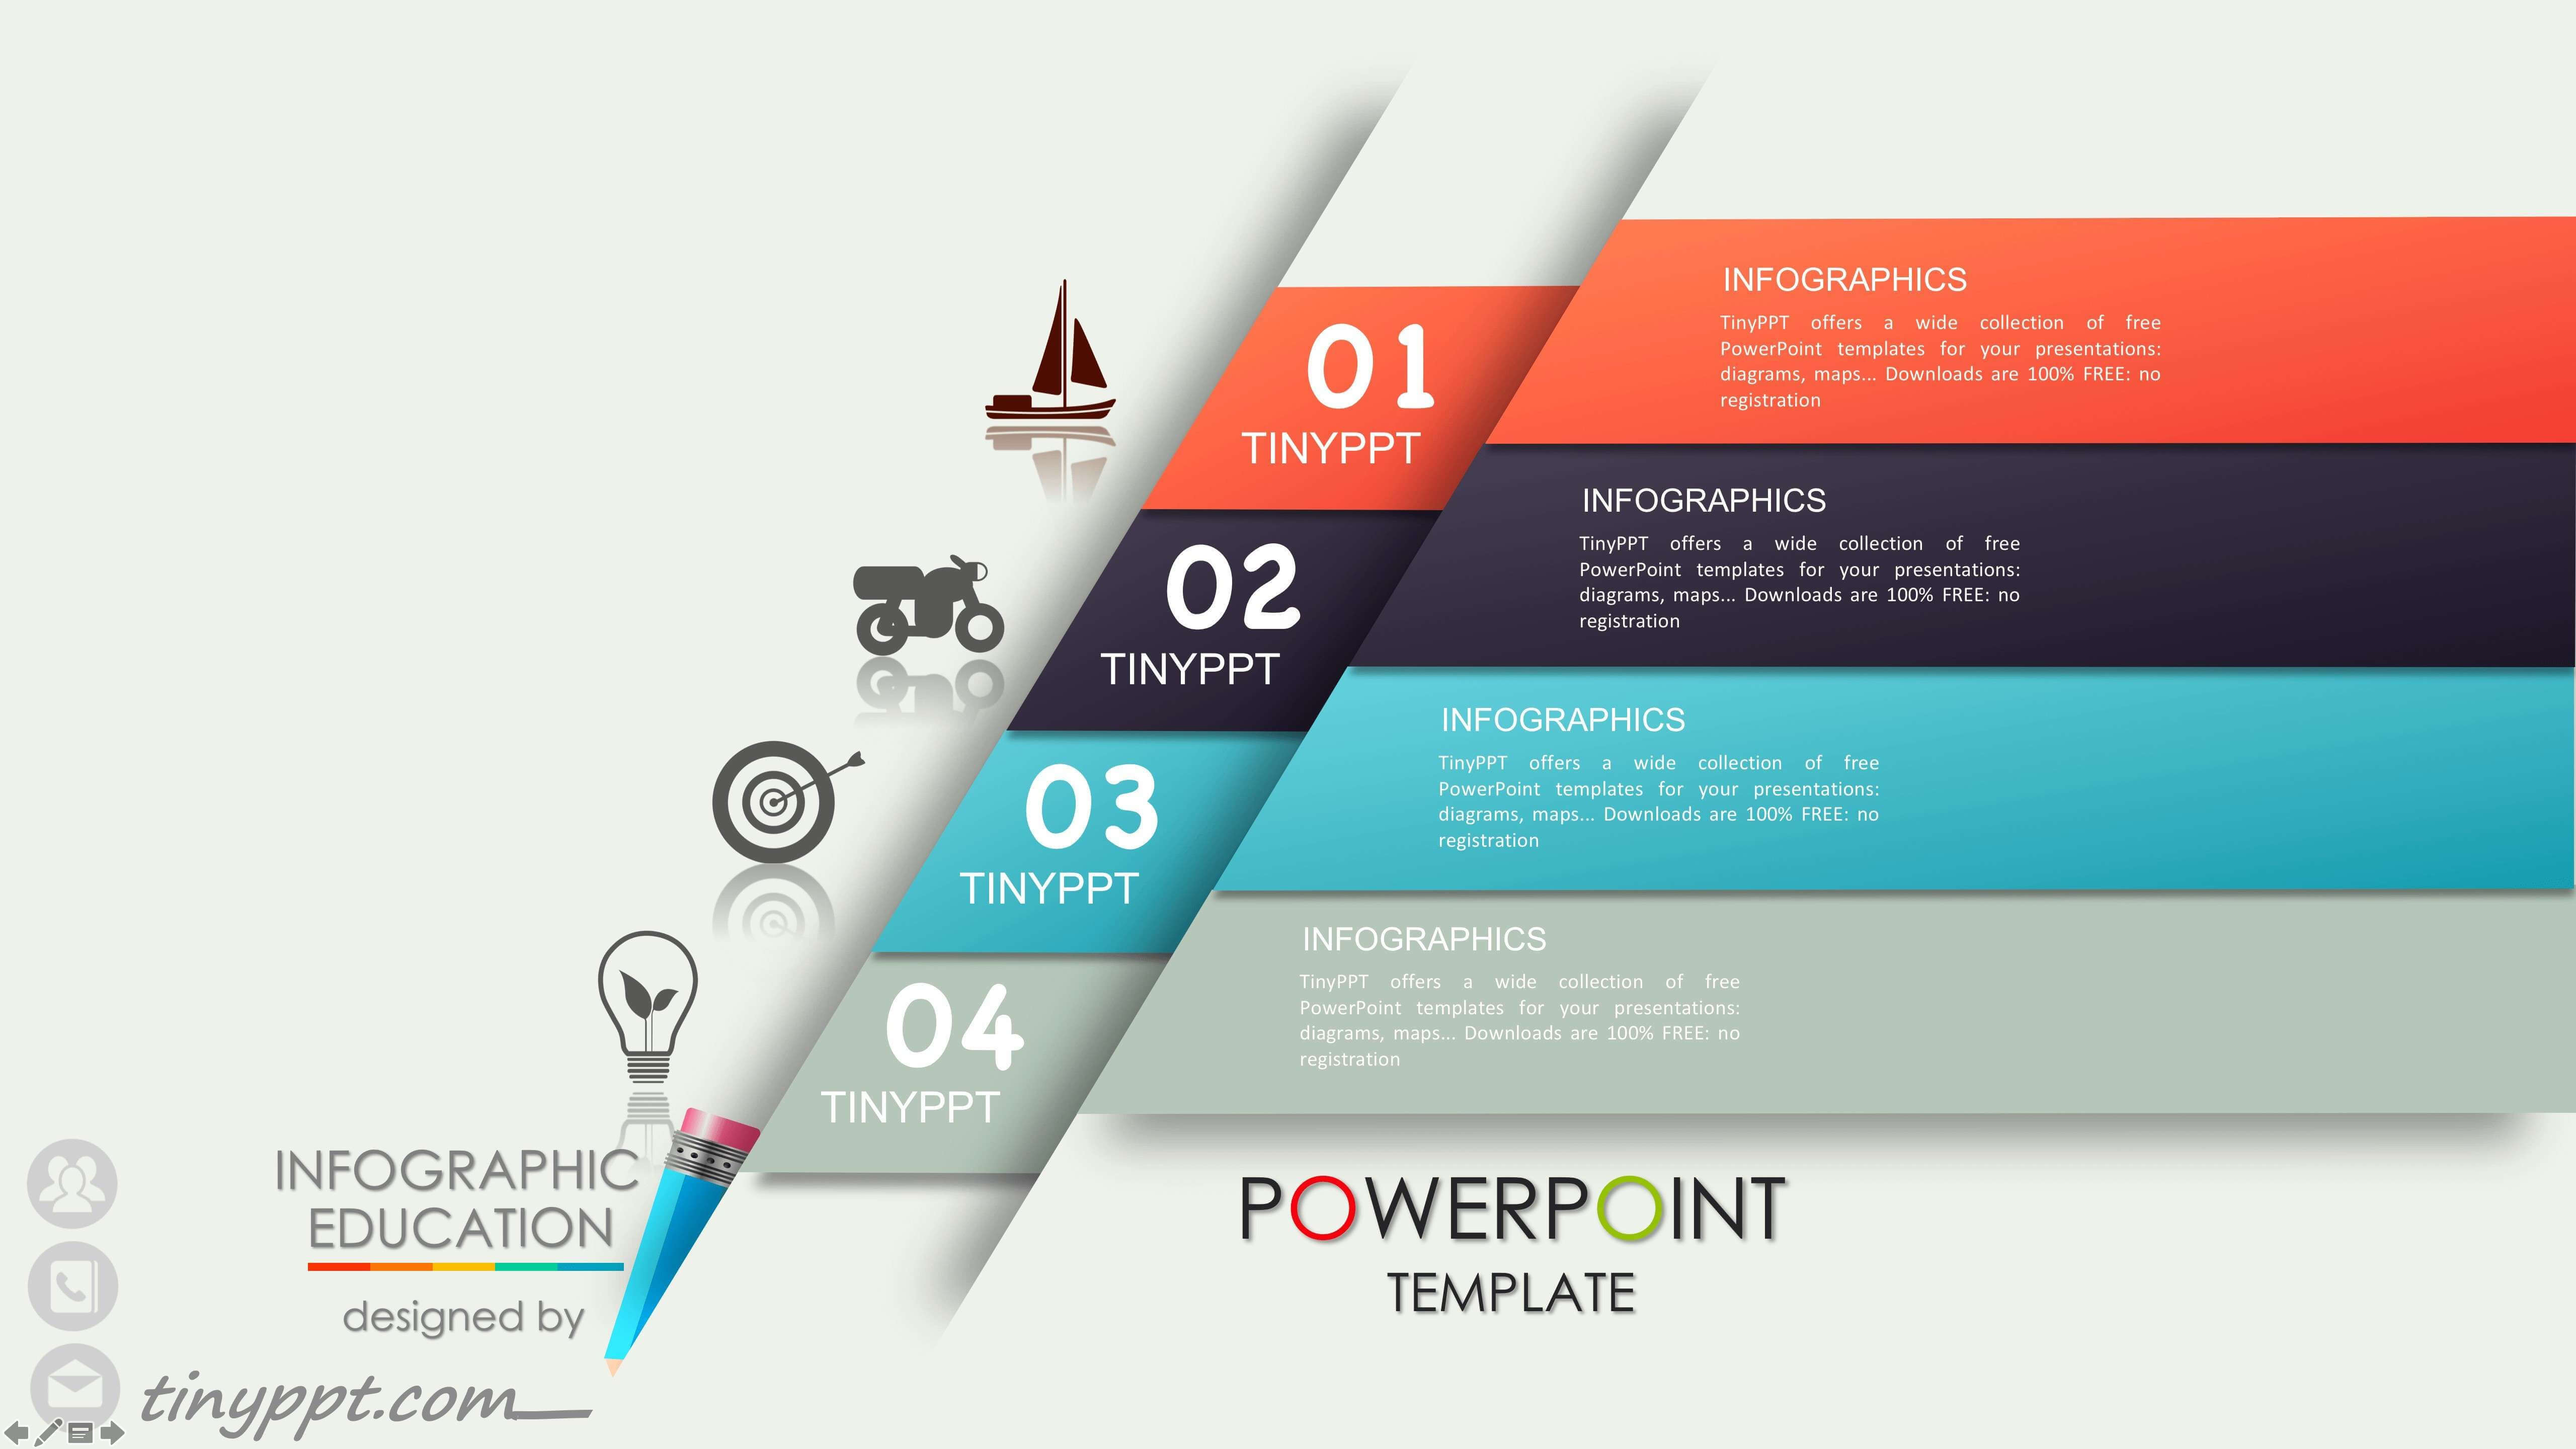 Elegant Pictures Of Ppt 2007 Templates Free Download Path With Powerpoint 2007 Template Free Download